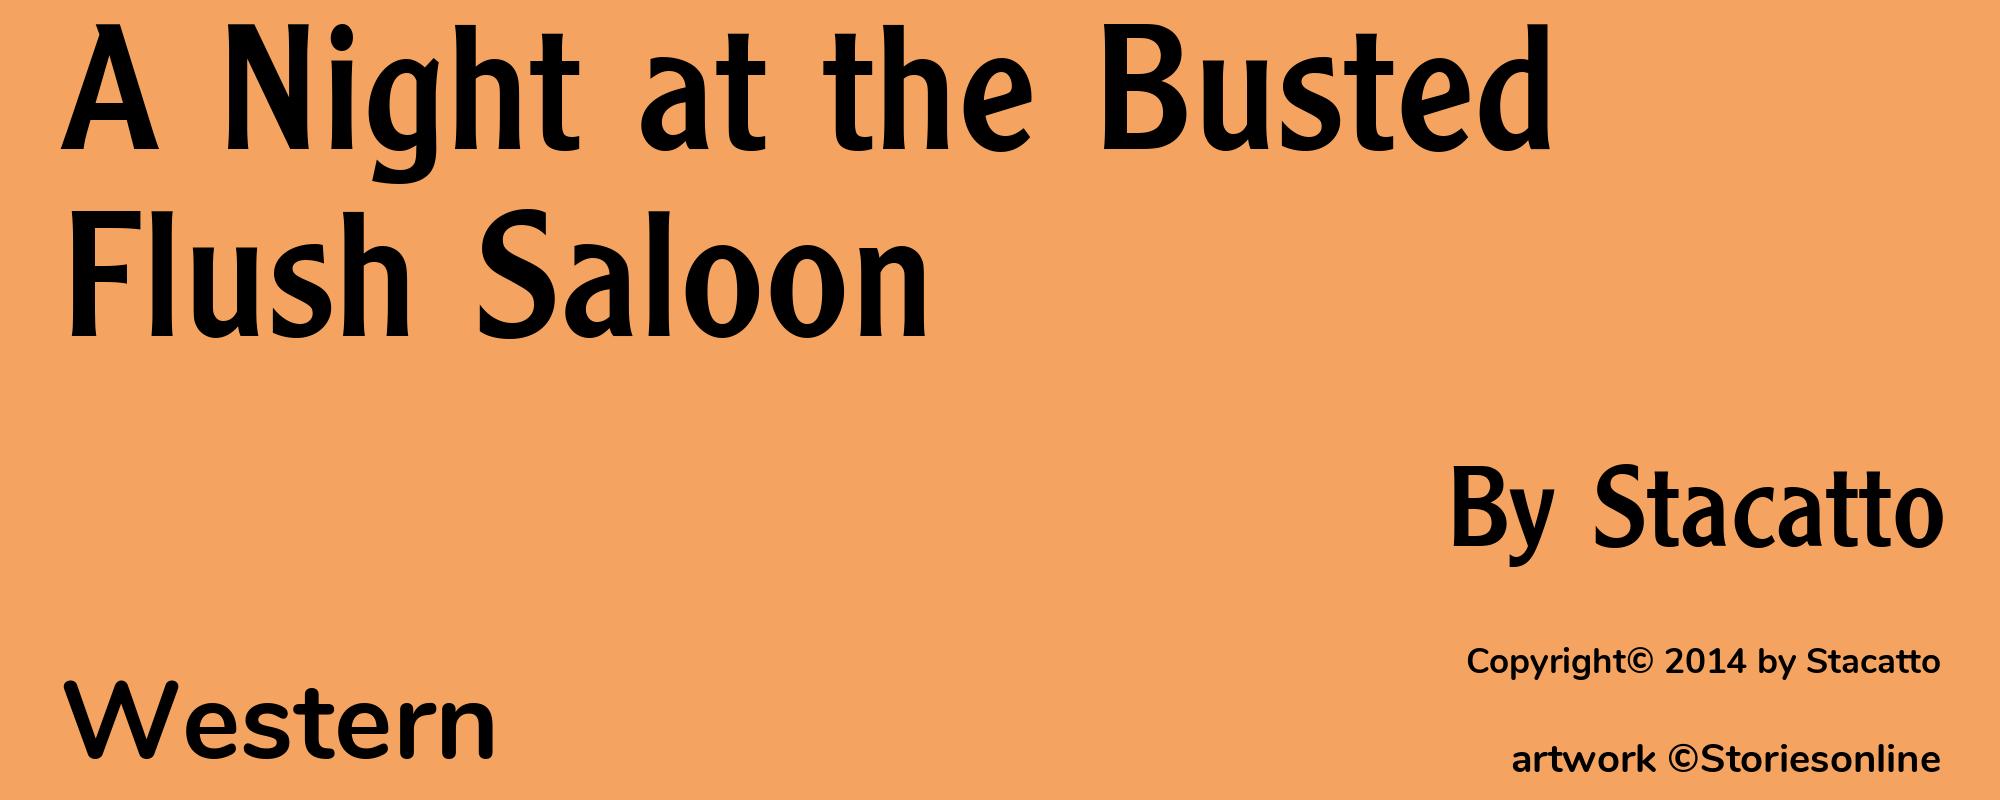 A Night at the Busted Flush Saloon - Cover